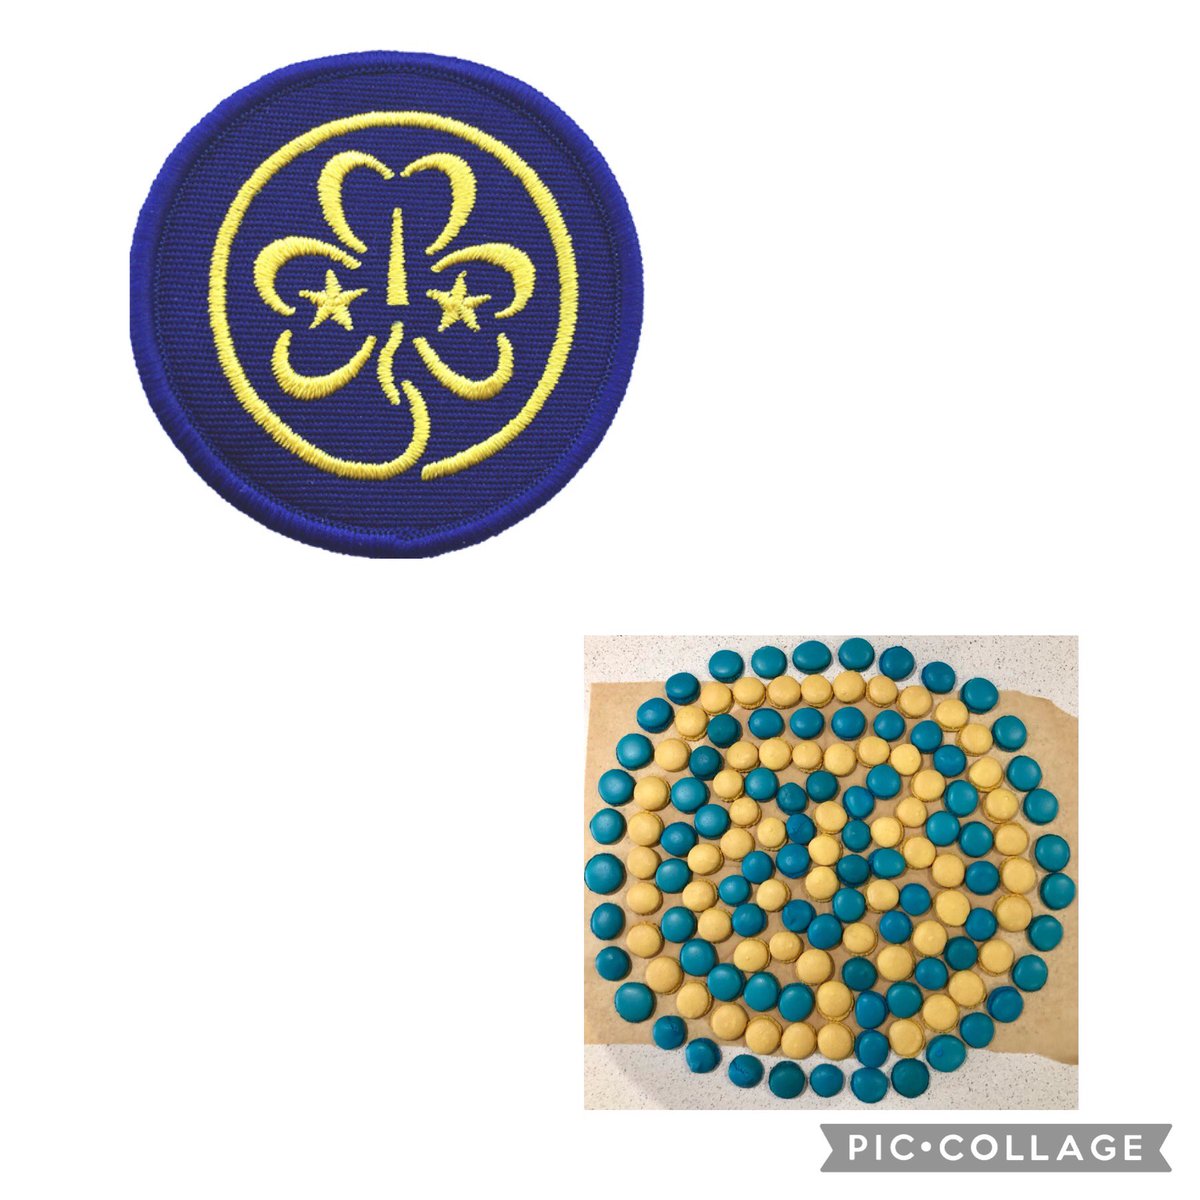 As @GirlguidingSWE eat their way around the world celebrating #WTD2022, I’ve tried creating the @wagggsworld World Badge with macarons